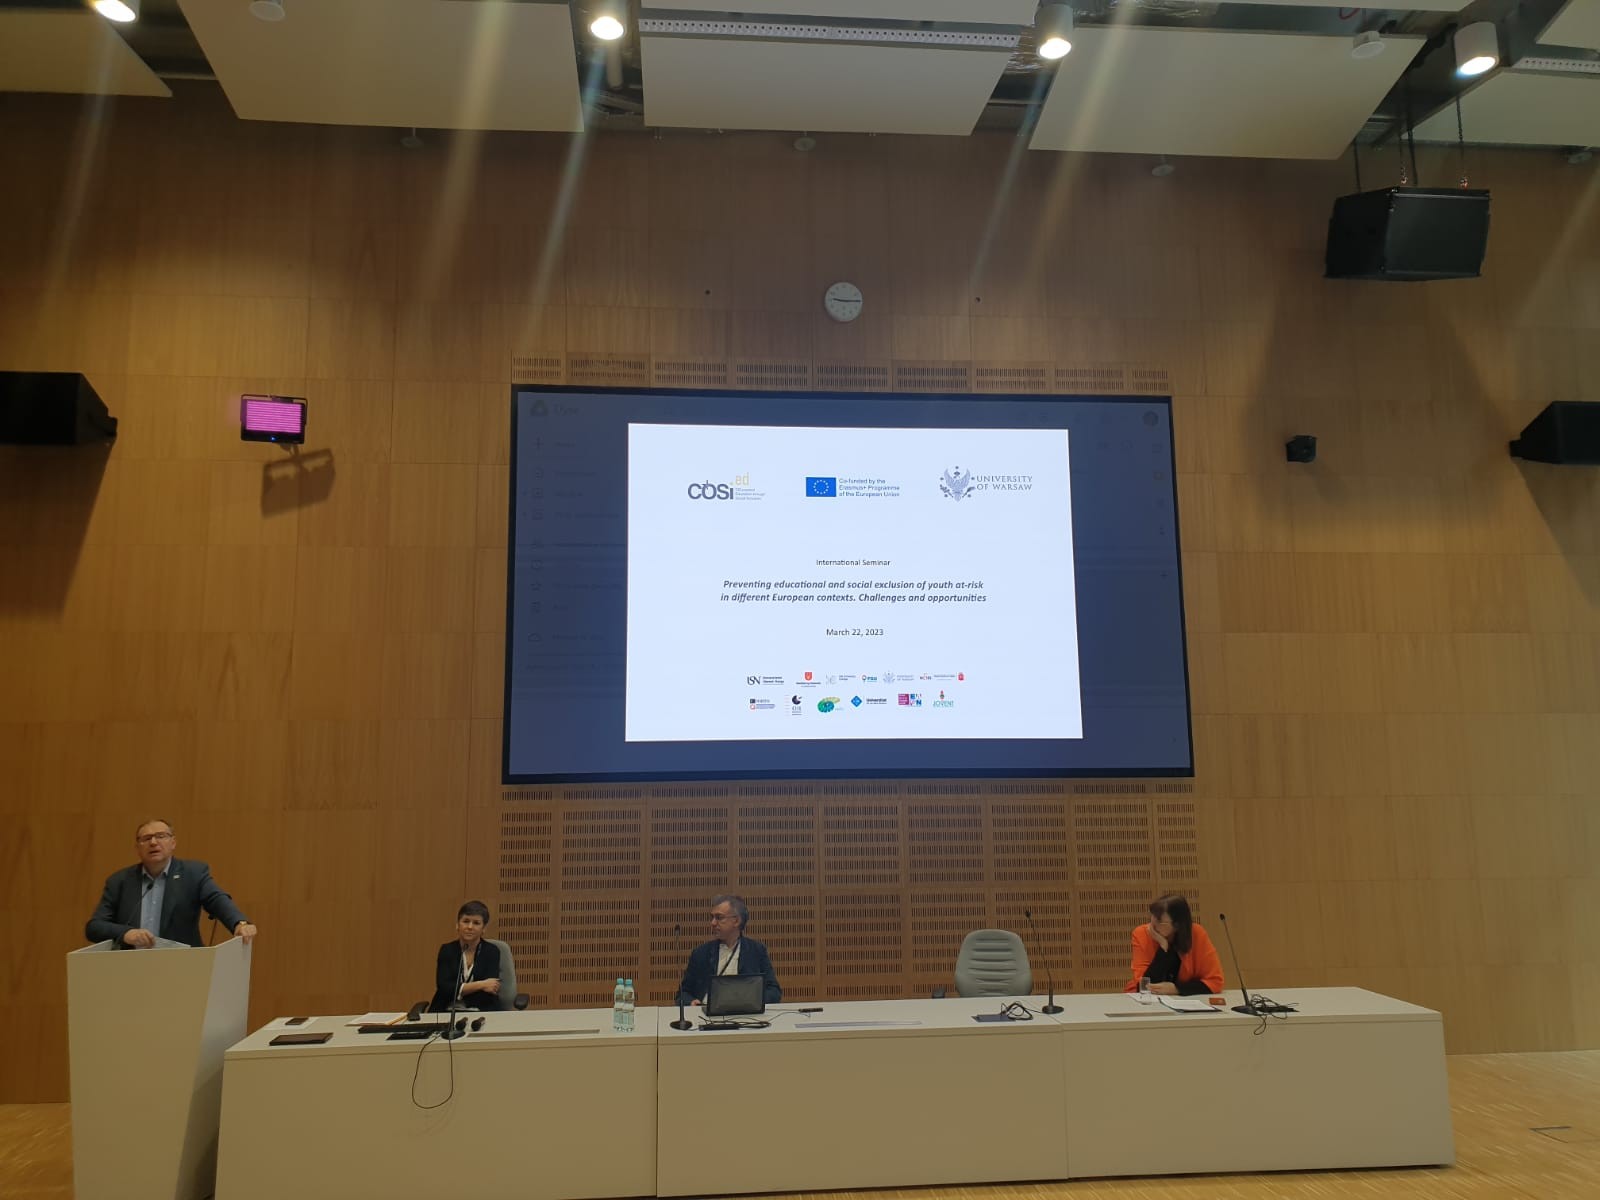 International Open Seminar "Preventing educational and social exclusion of youth at -risk in different European contexts. Challenges and opportunities"